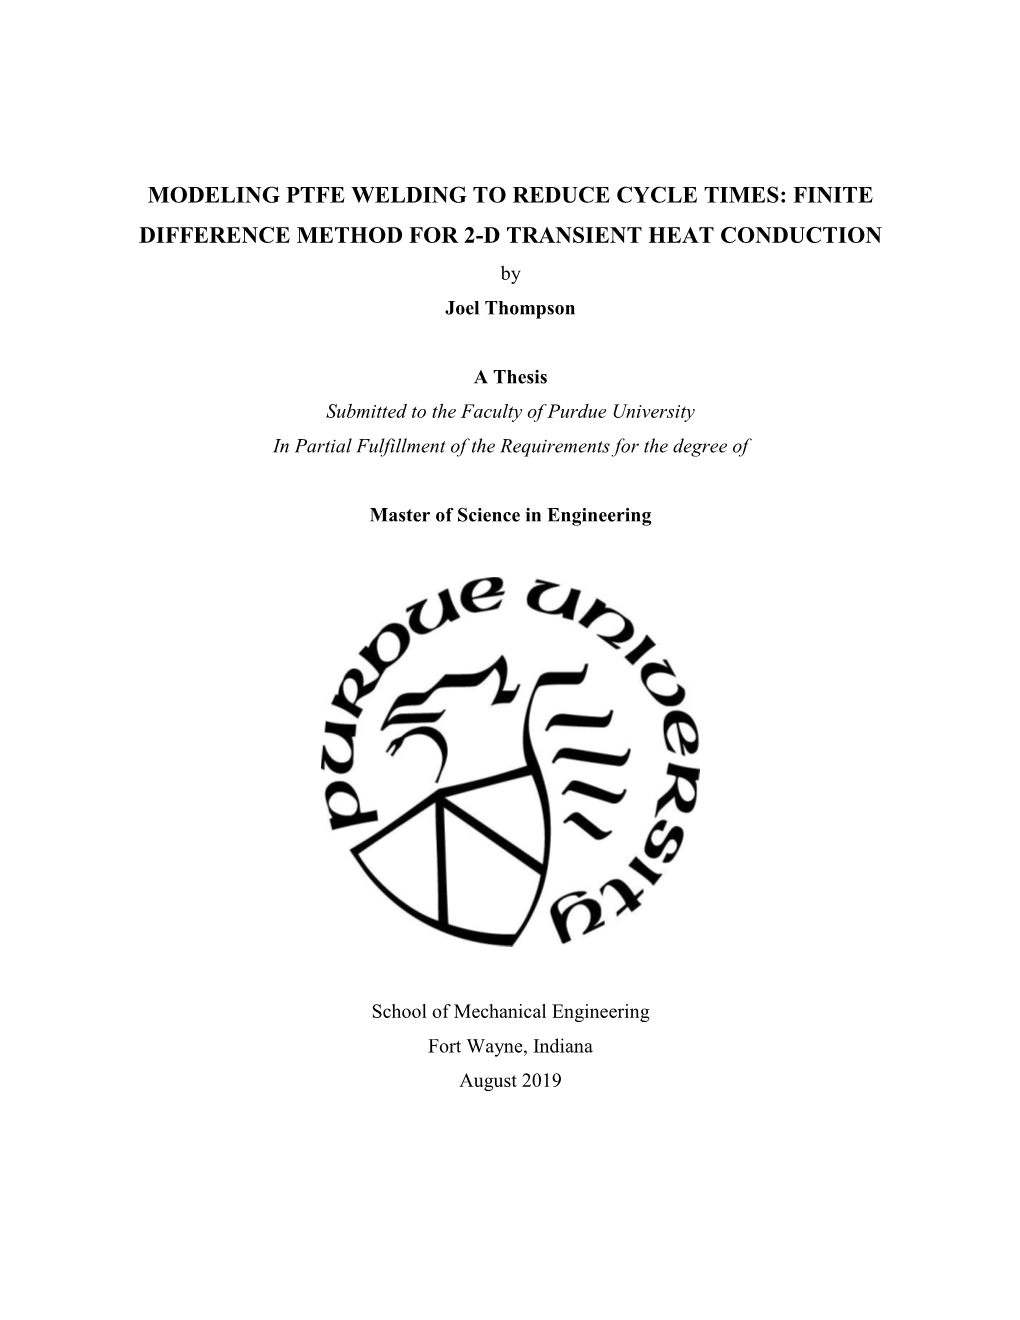 MODELING PTFE WELDING to REDUCE CYCLE TIMES: FINITE DIFFERENCE METHOD for 2-D TRANSIENT HEAT CONDUCTION by Joel Thompson